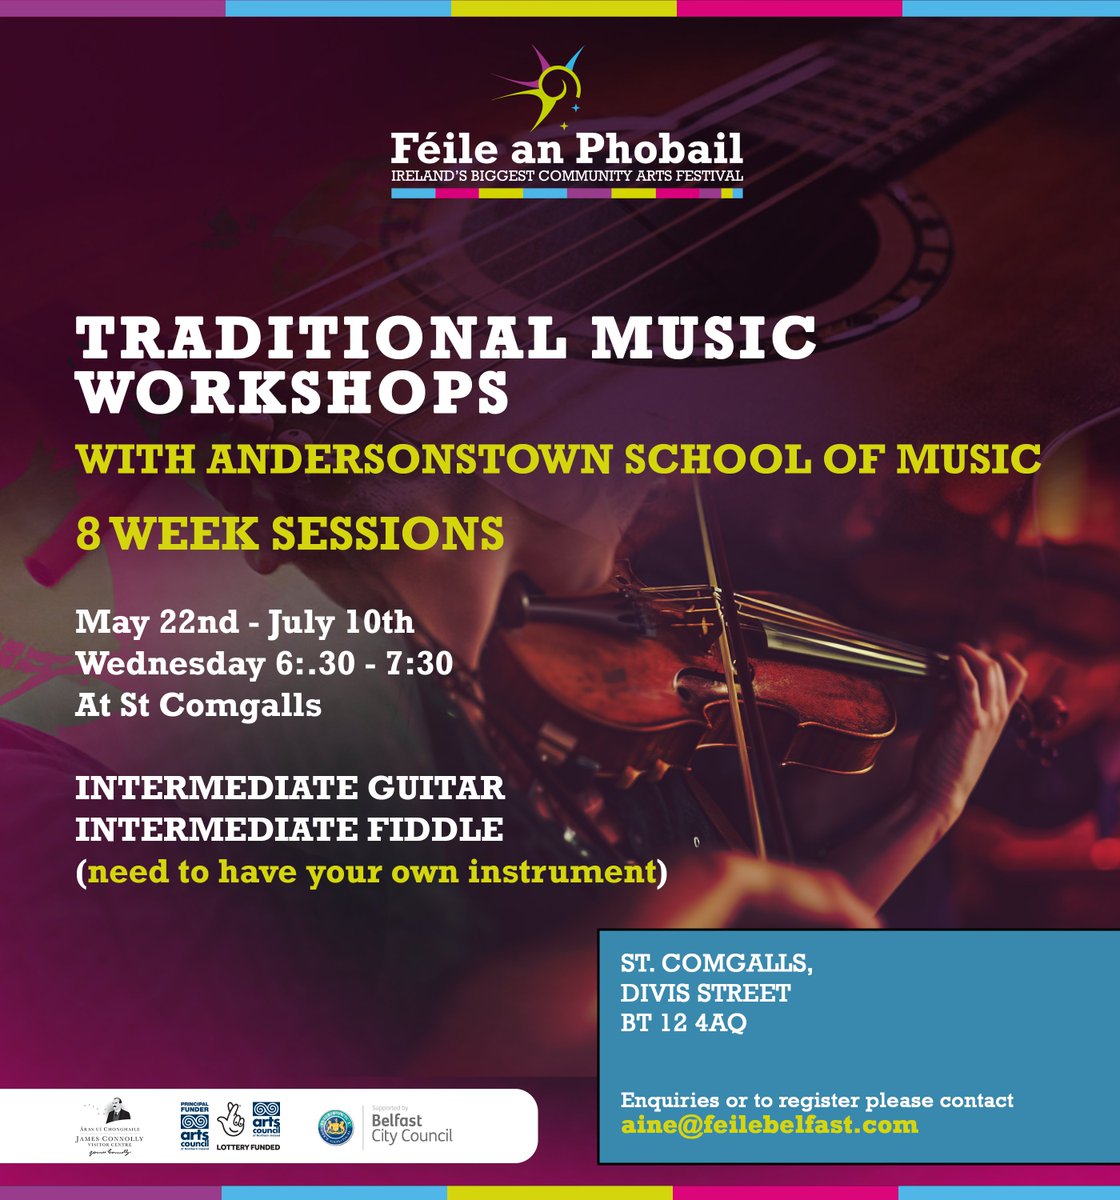 FREE Traditional Music Workshops 8 WEEK SESSIONS 📅May 22nd - July 10th 👉Wednesday 6:.30 - 7:30 📍At St Comgalls 🎸INTERMEDIATE GUITAR 🎻INTERMEDIATE FIDDLE (need to have your own instrument) Enquiries or to register please contact aine@feilebelfast.com